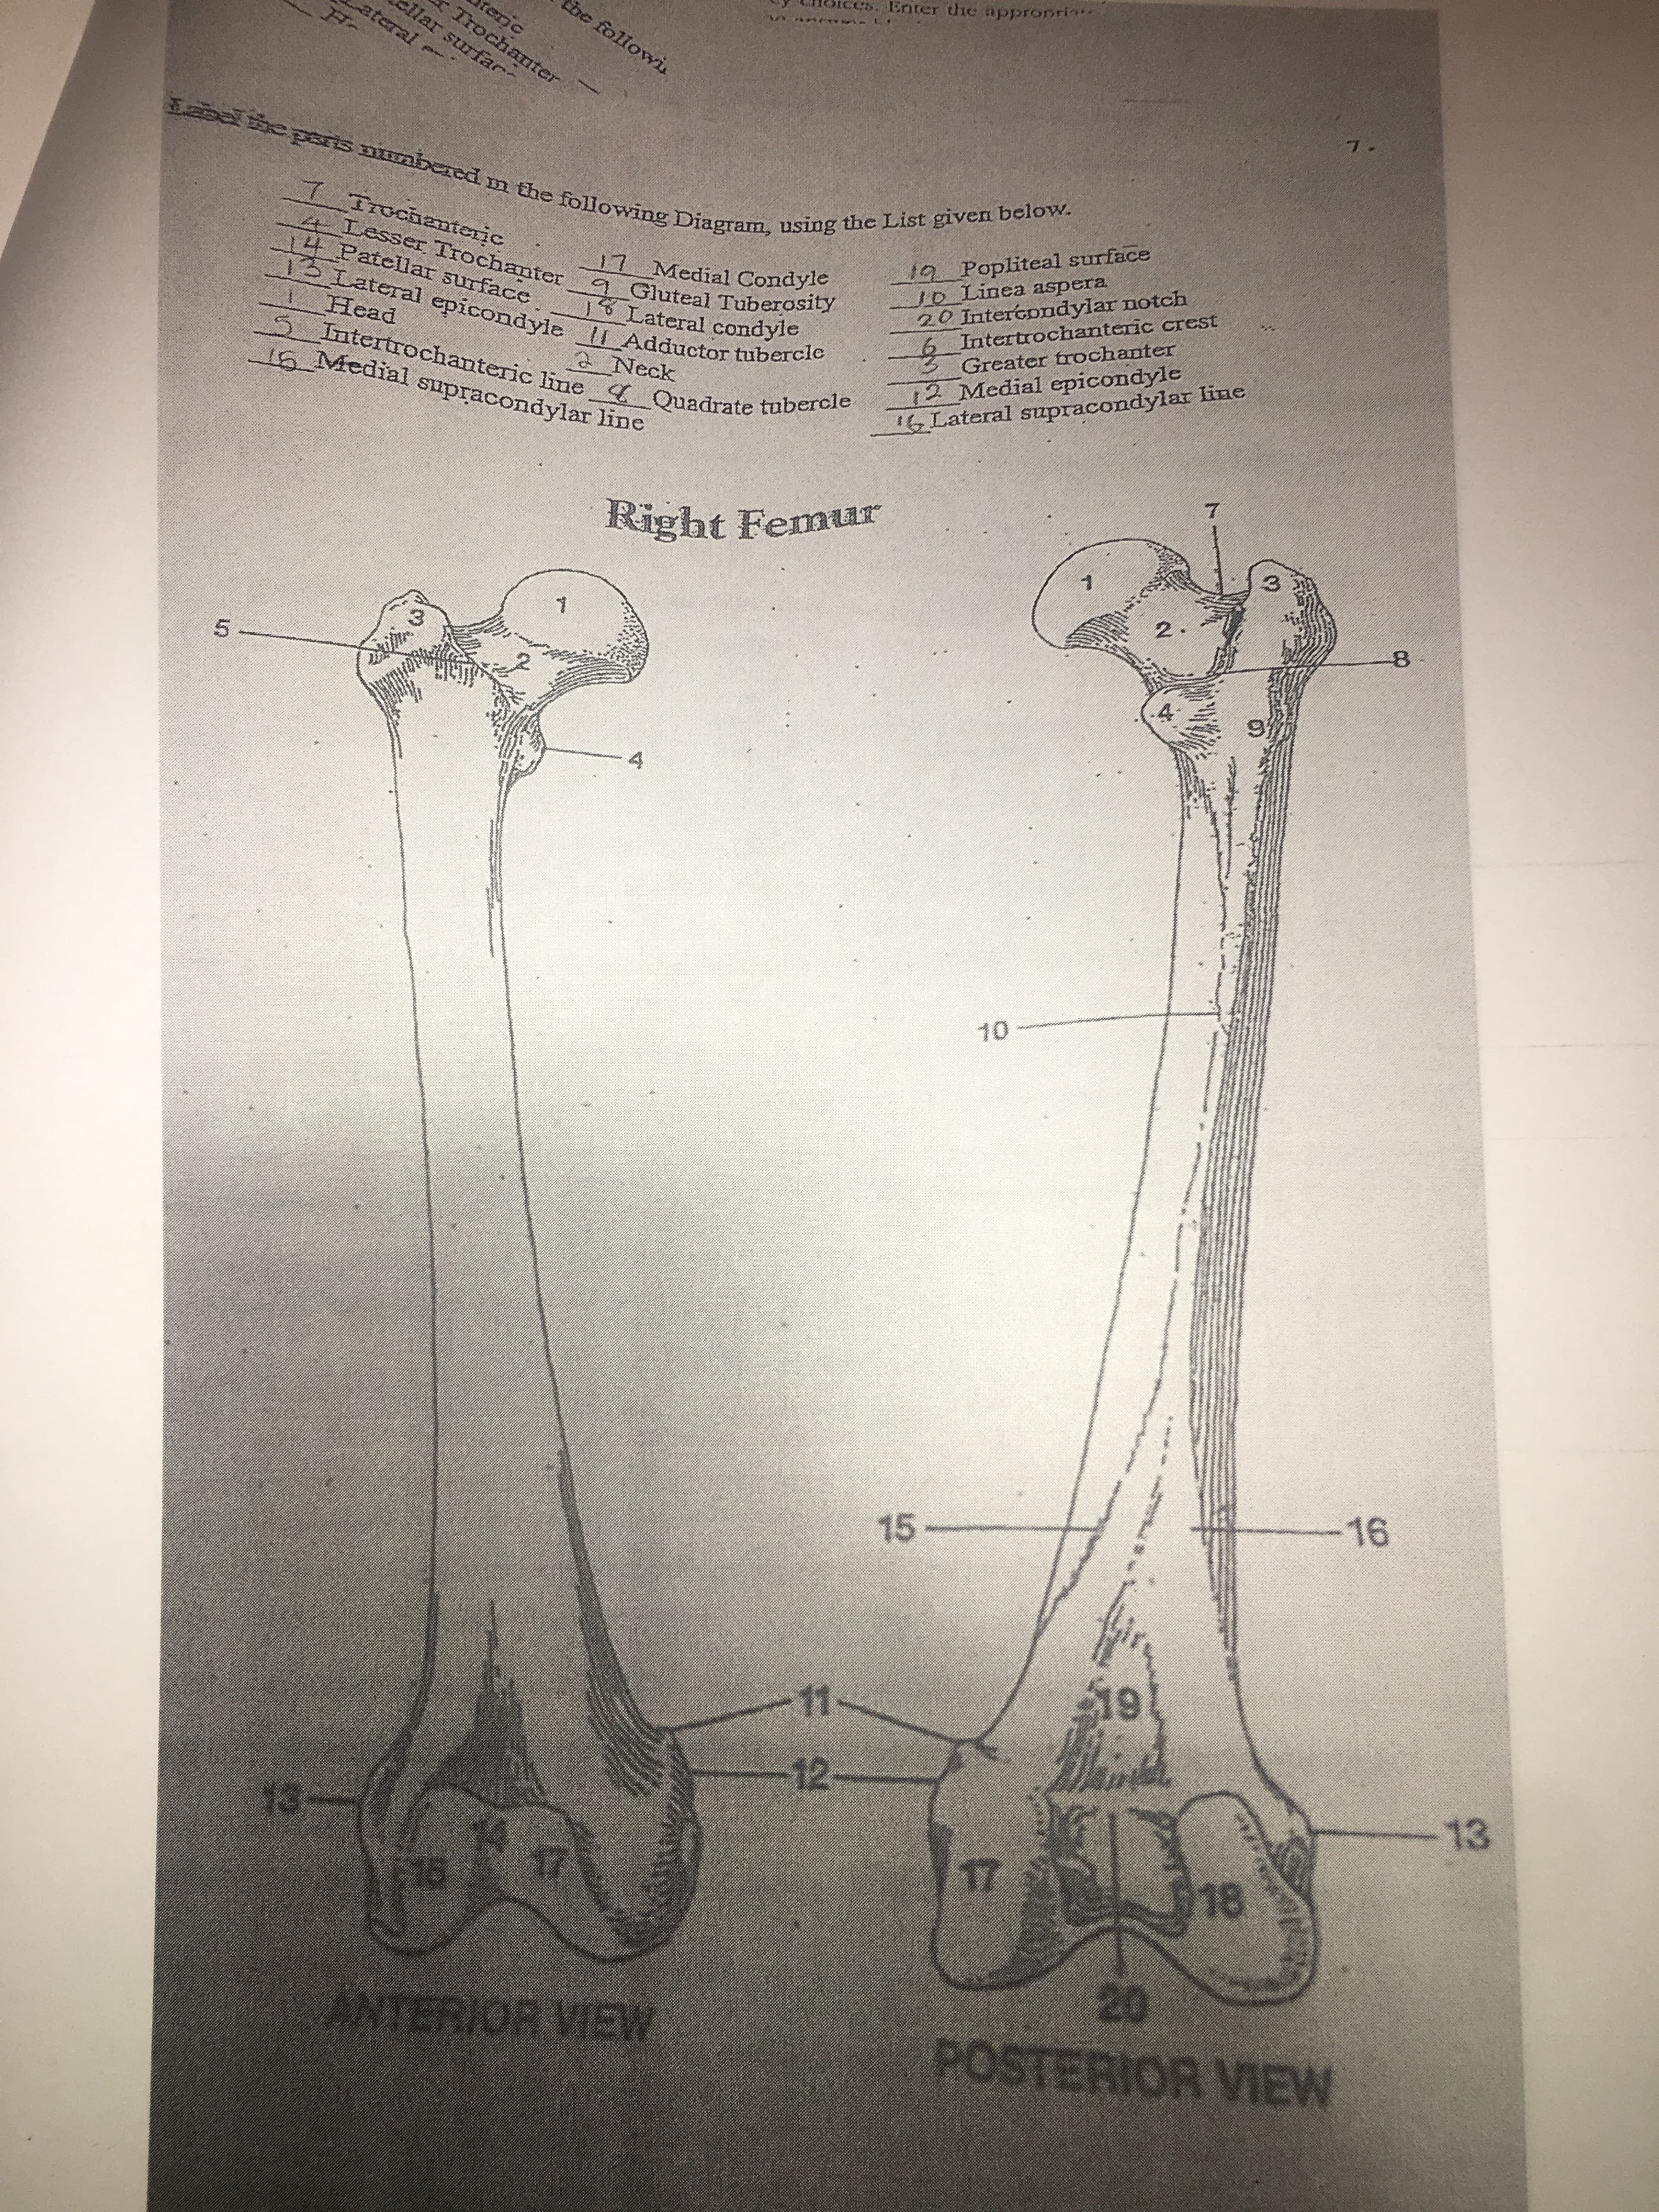 noices, Enter the appronri
be followi
rerjc
Trochanter
cllar surfac
ateral
7.
eparis mmbered m the following Diagram, using the List given below.
19 Popliteal surface
Jo Linea aspera
20 Interconadylar notch
Intertrochanteric crest
7 Irochanteric
4Lesser Trochanter
14 Patellar surface
19.
17 Medial Condyle
9 Gluteal Tuberosity
18 Lateral condyle
13 Lateral epicondyle I Adductor tubercle
12 Medial epicondyle
16 Lateral supracondylar line
Greater trochanter
Head
SIntertrochanteric line Quadrate tubercle
2 Neck
16_Medial supracondylar line
Right Femur
2.
-8
4.
10
16
15-
11
12-
13
13-
18
17
17
20
POSTERIOR VIEW
ANTERIOR VIEW
